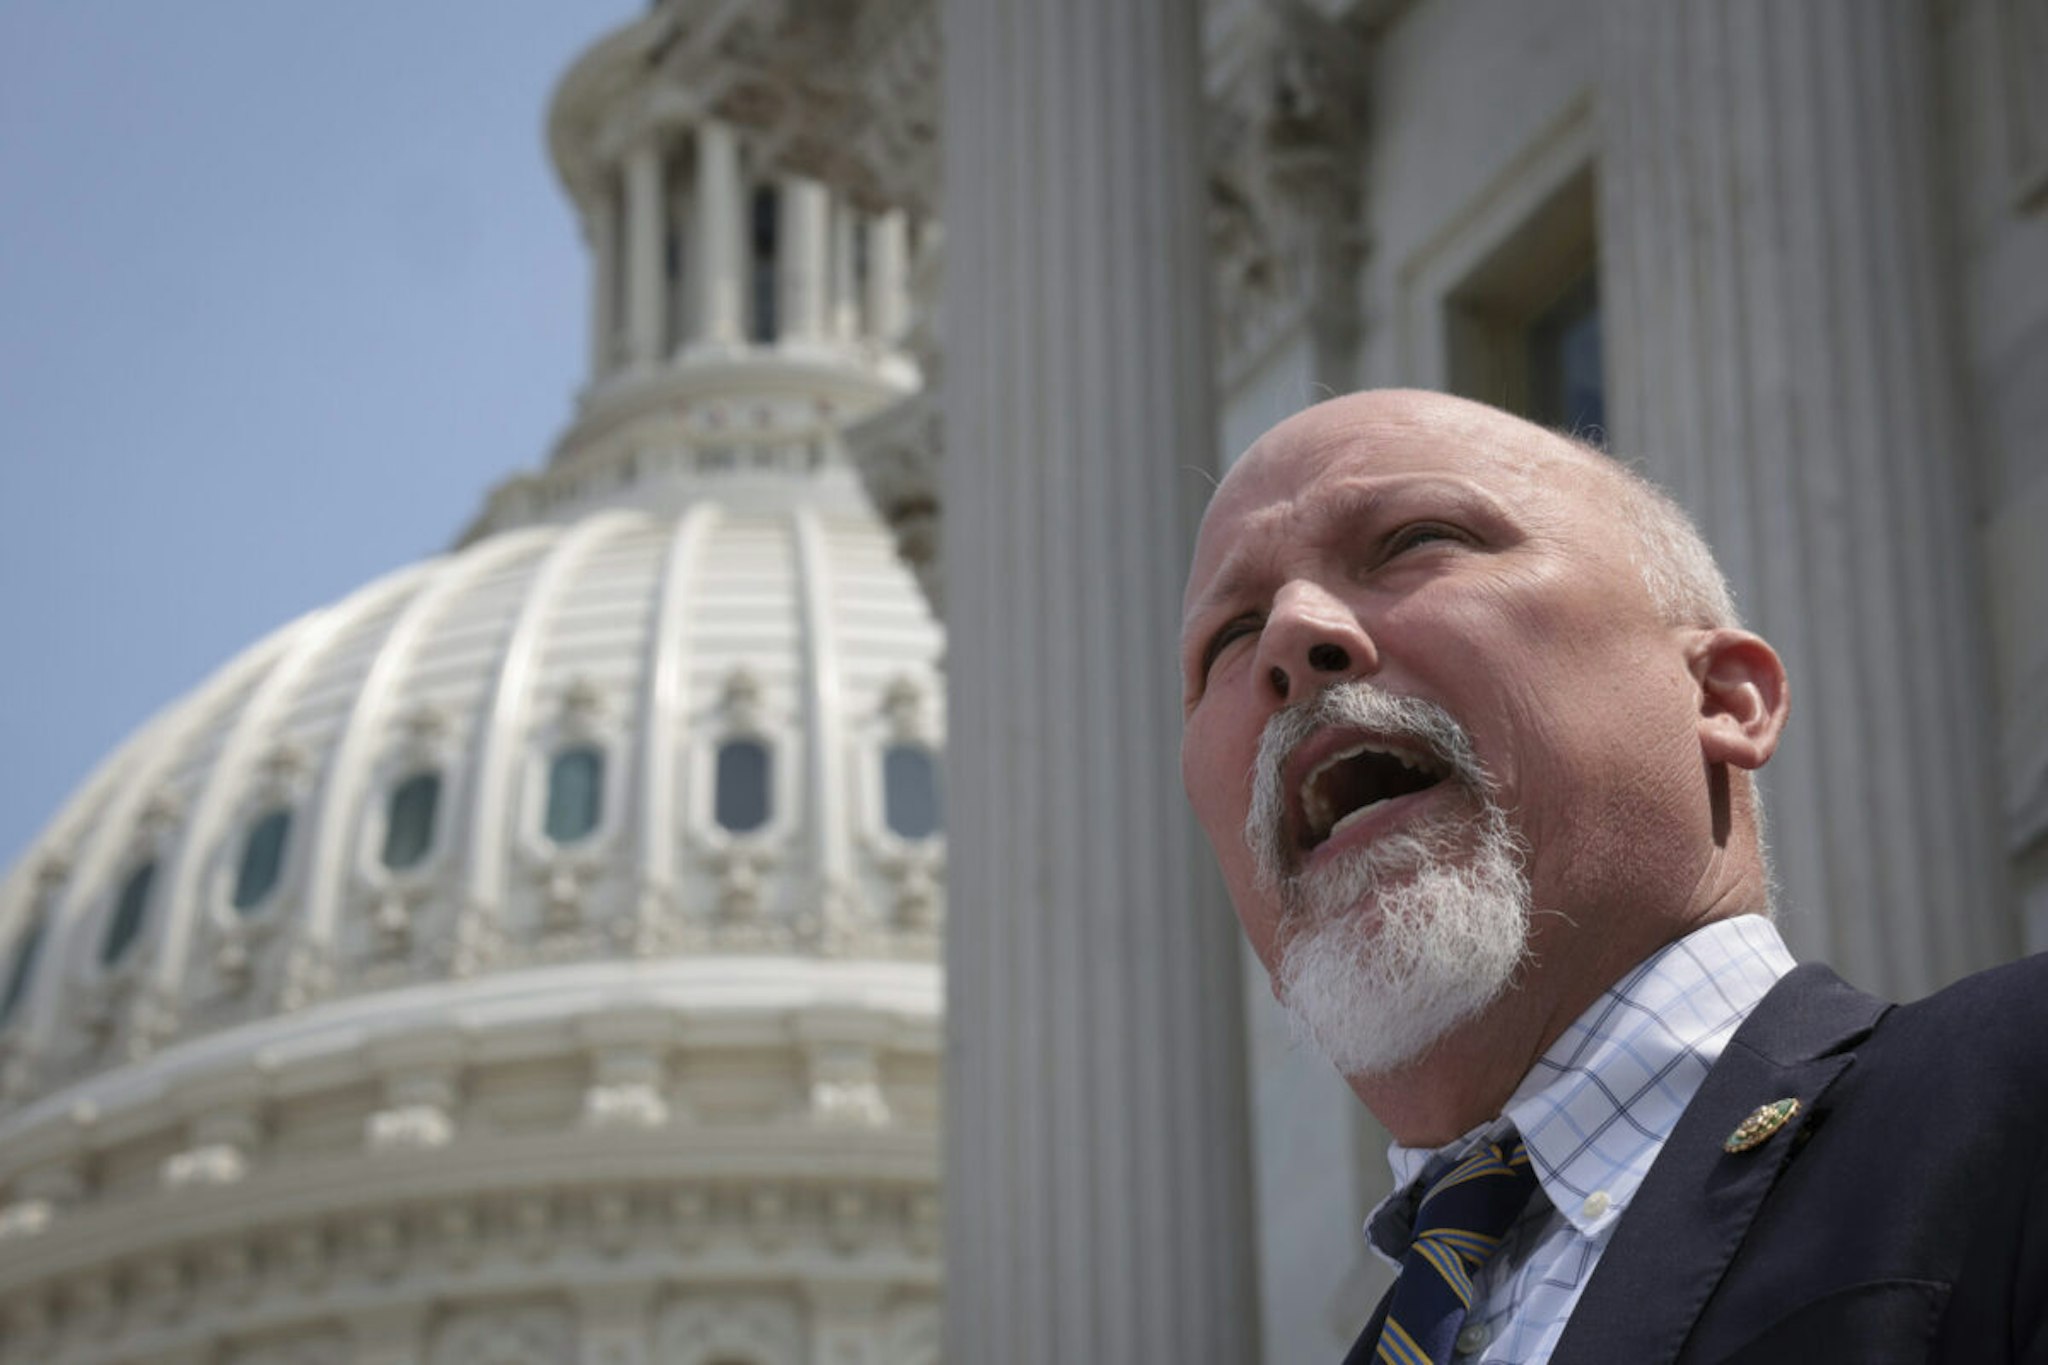 Rep. Chip Roy (R-TX) speaks during a press conference outside the U.S. Capitol on May 17, 2023 in Washington, DC.